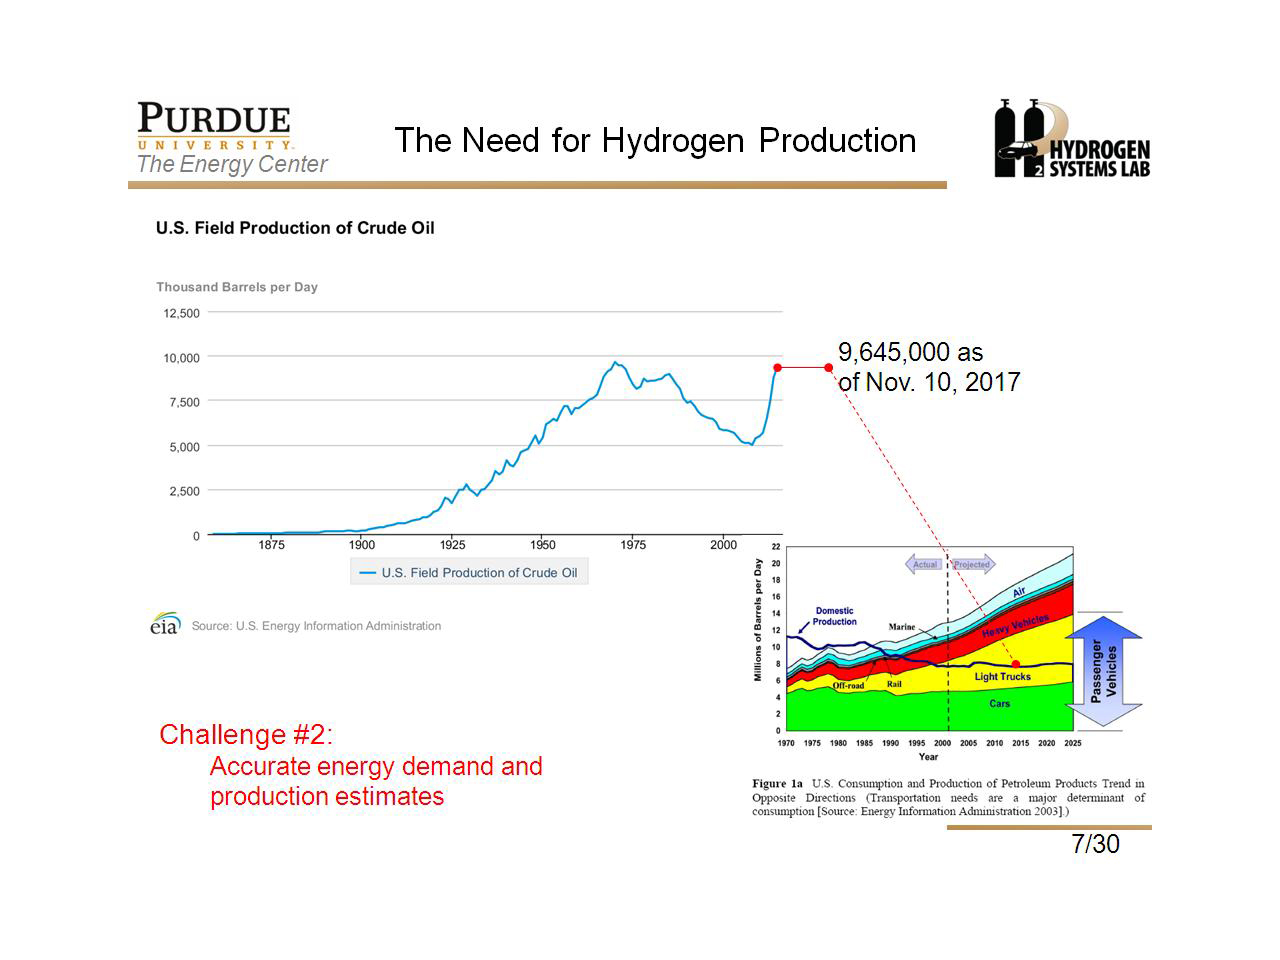 The Need for Hydrogen Production